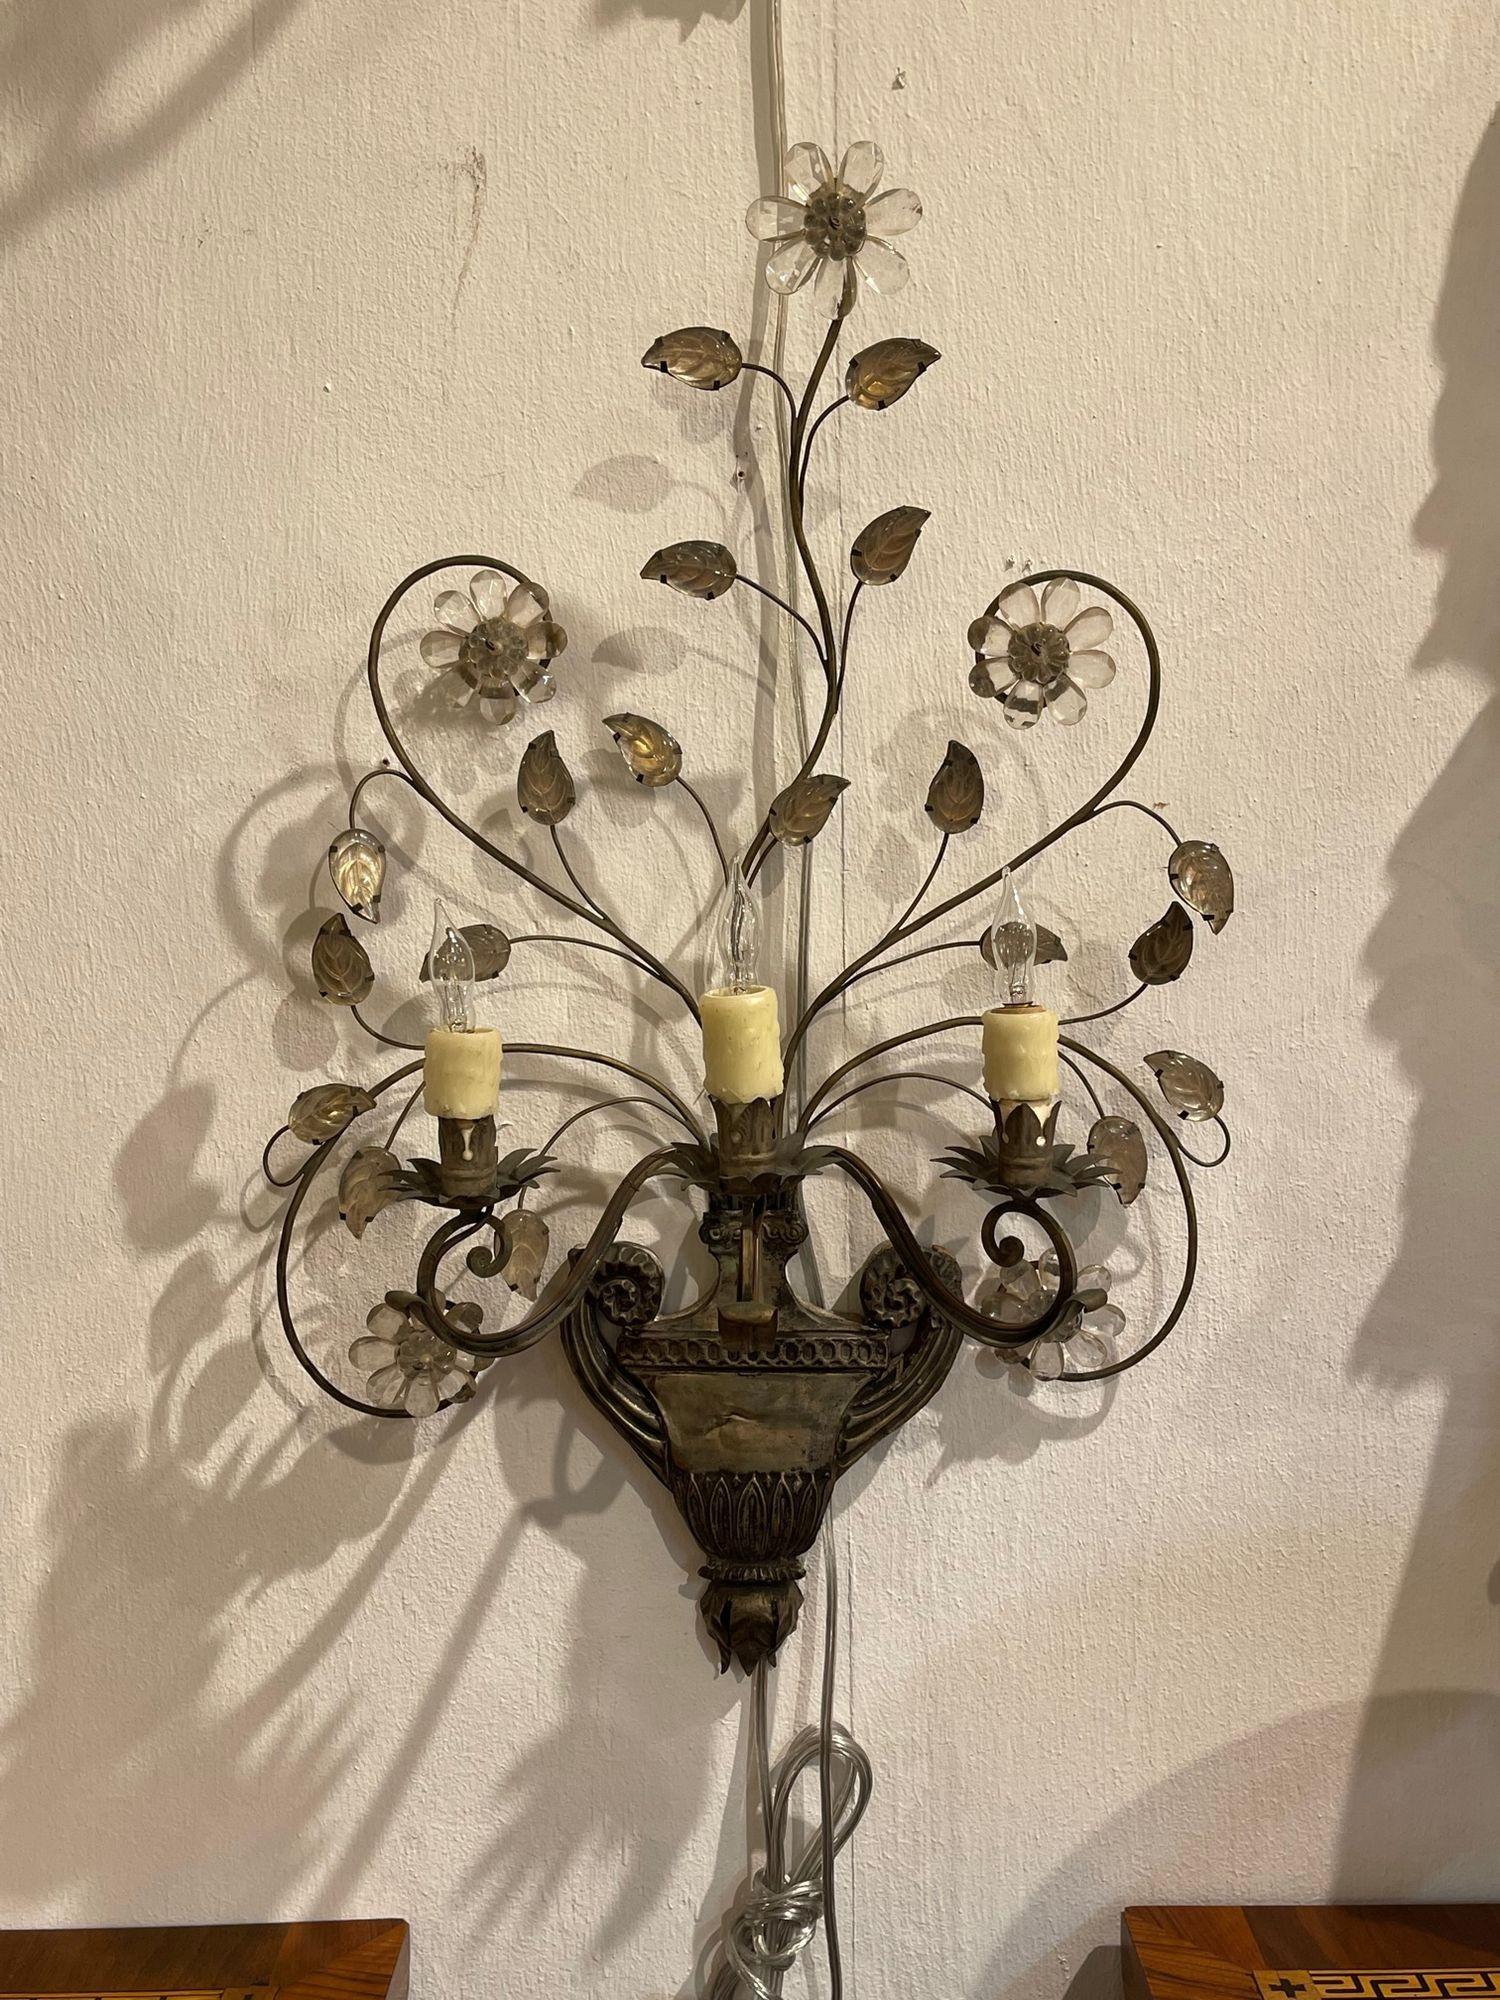 Very fine pair of vintage French Maison Bagues tole and crystal sconces. Lovely patina on these along with a swirling design and crystal flowers. So pretty!! Great for a traditional home.